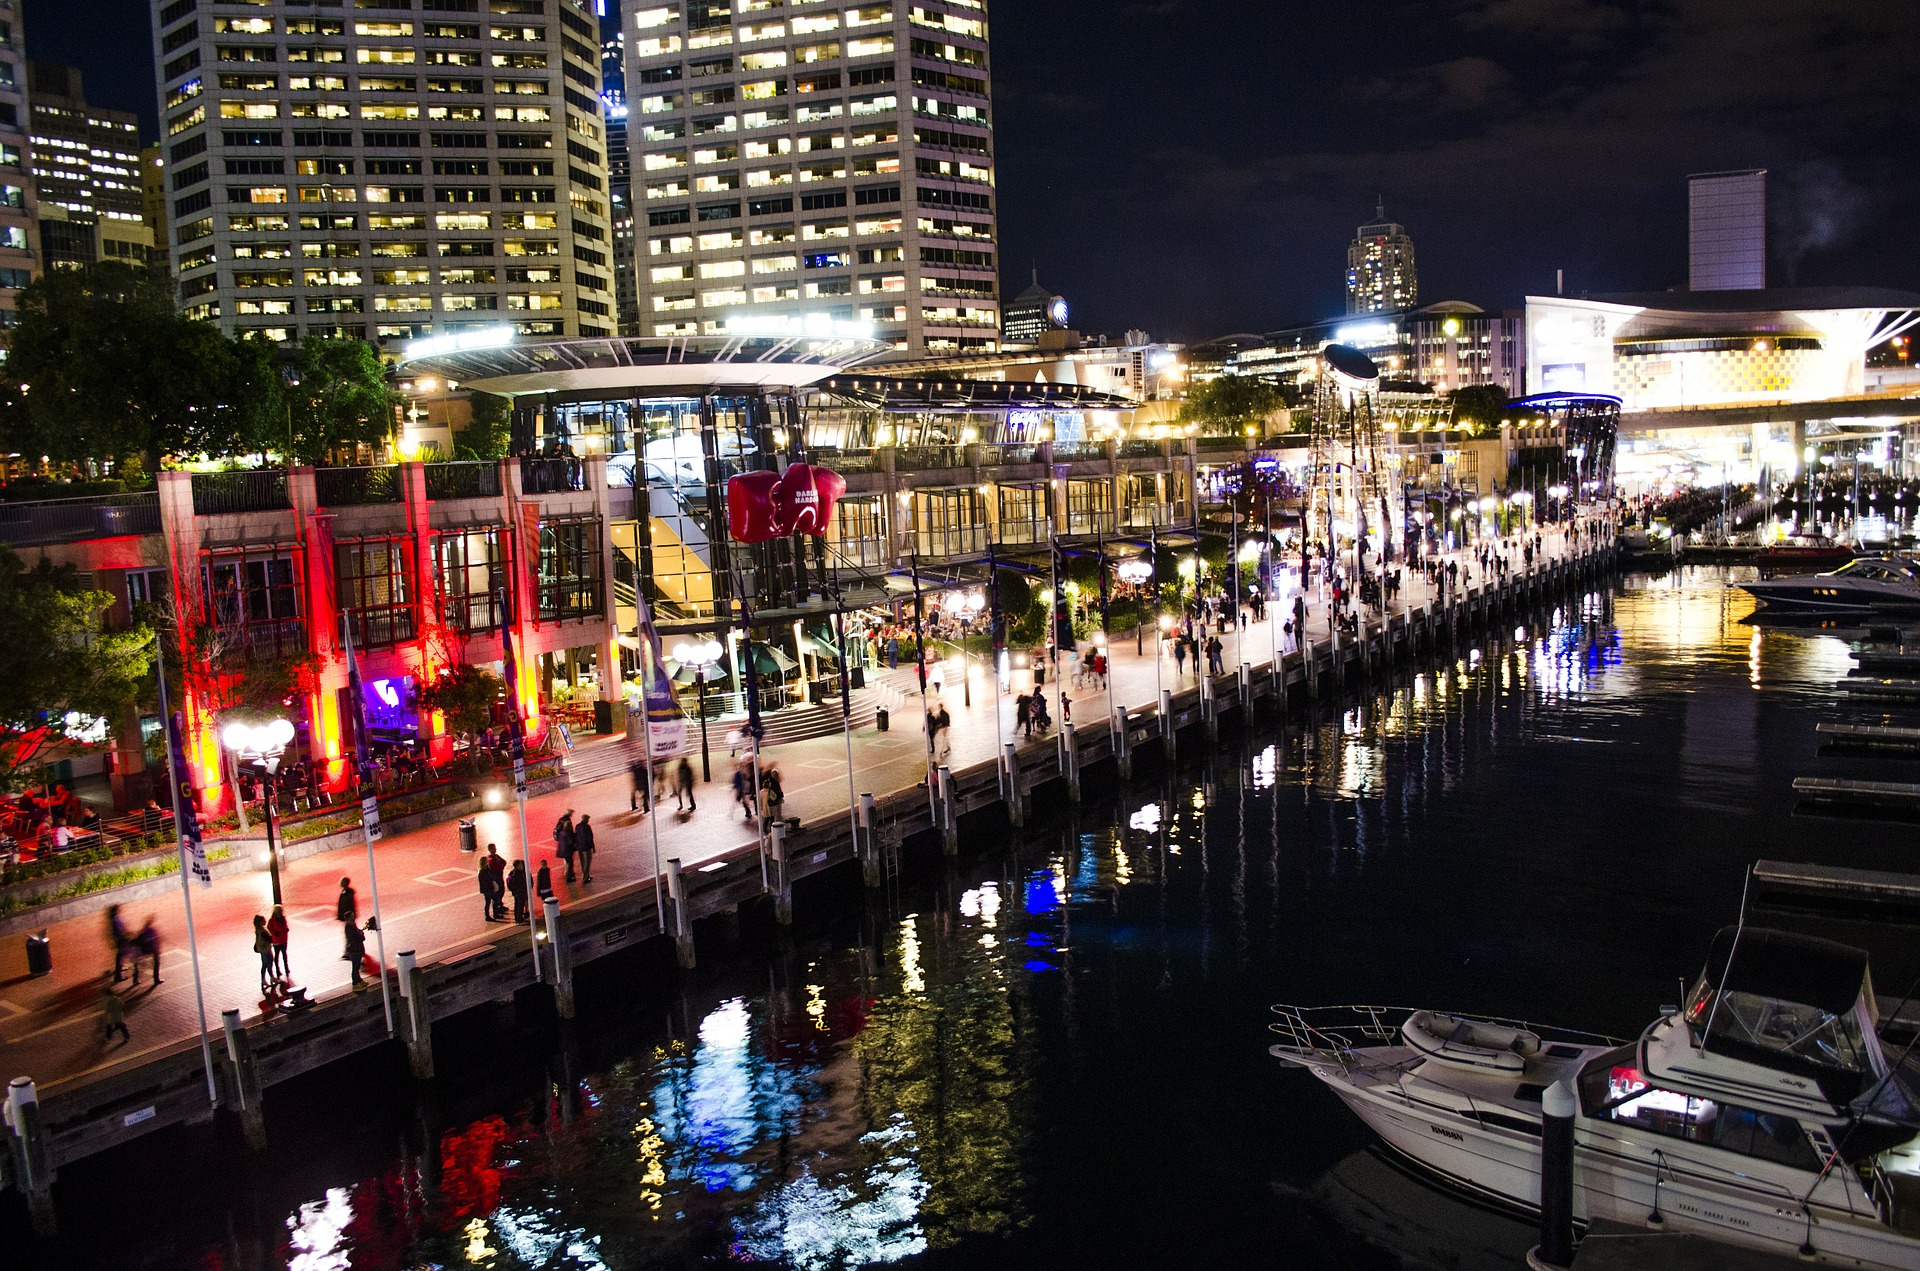 Star City Darling Harbour